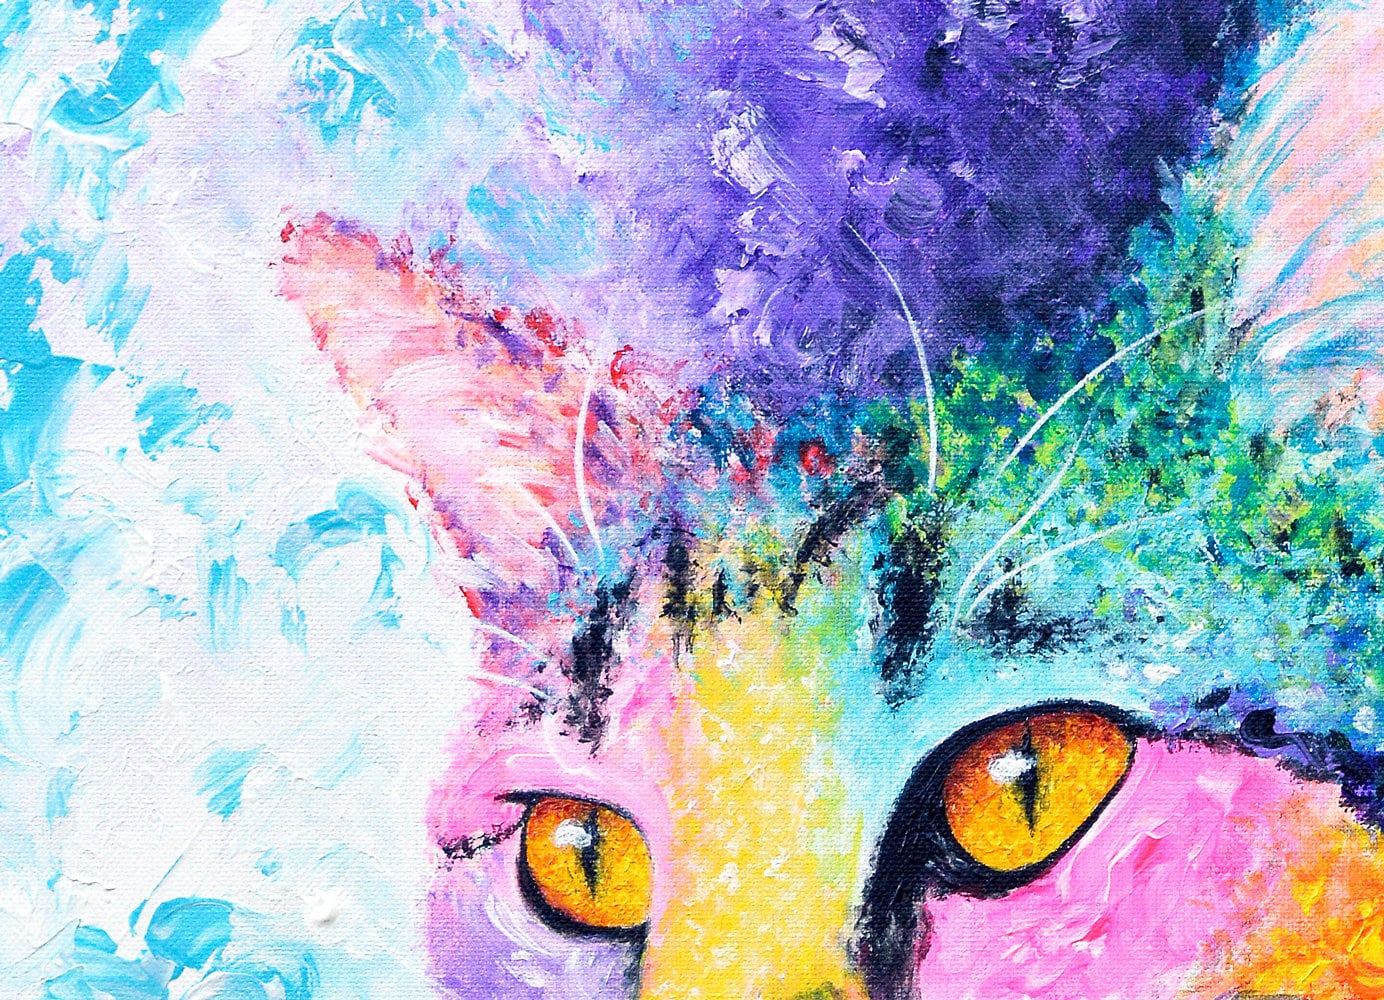 Tabby Cat Art - Cat Painting. Colorful Cat Print on CANVAS or PAPER by Krystle Cole